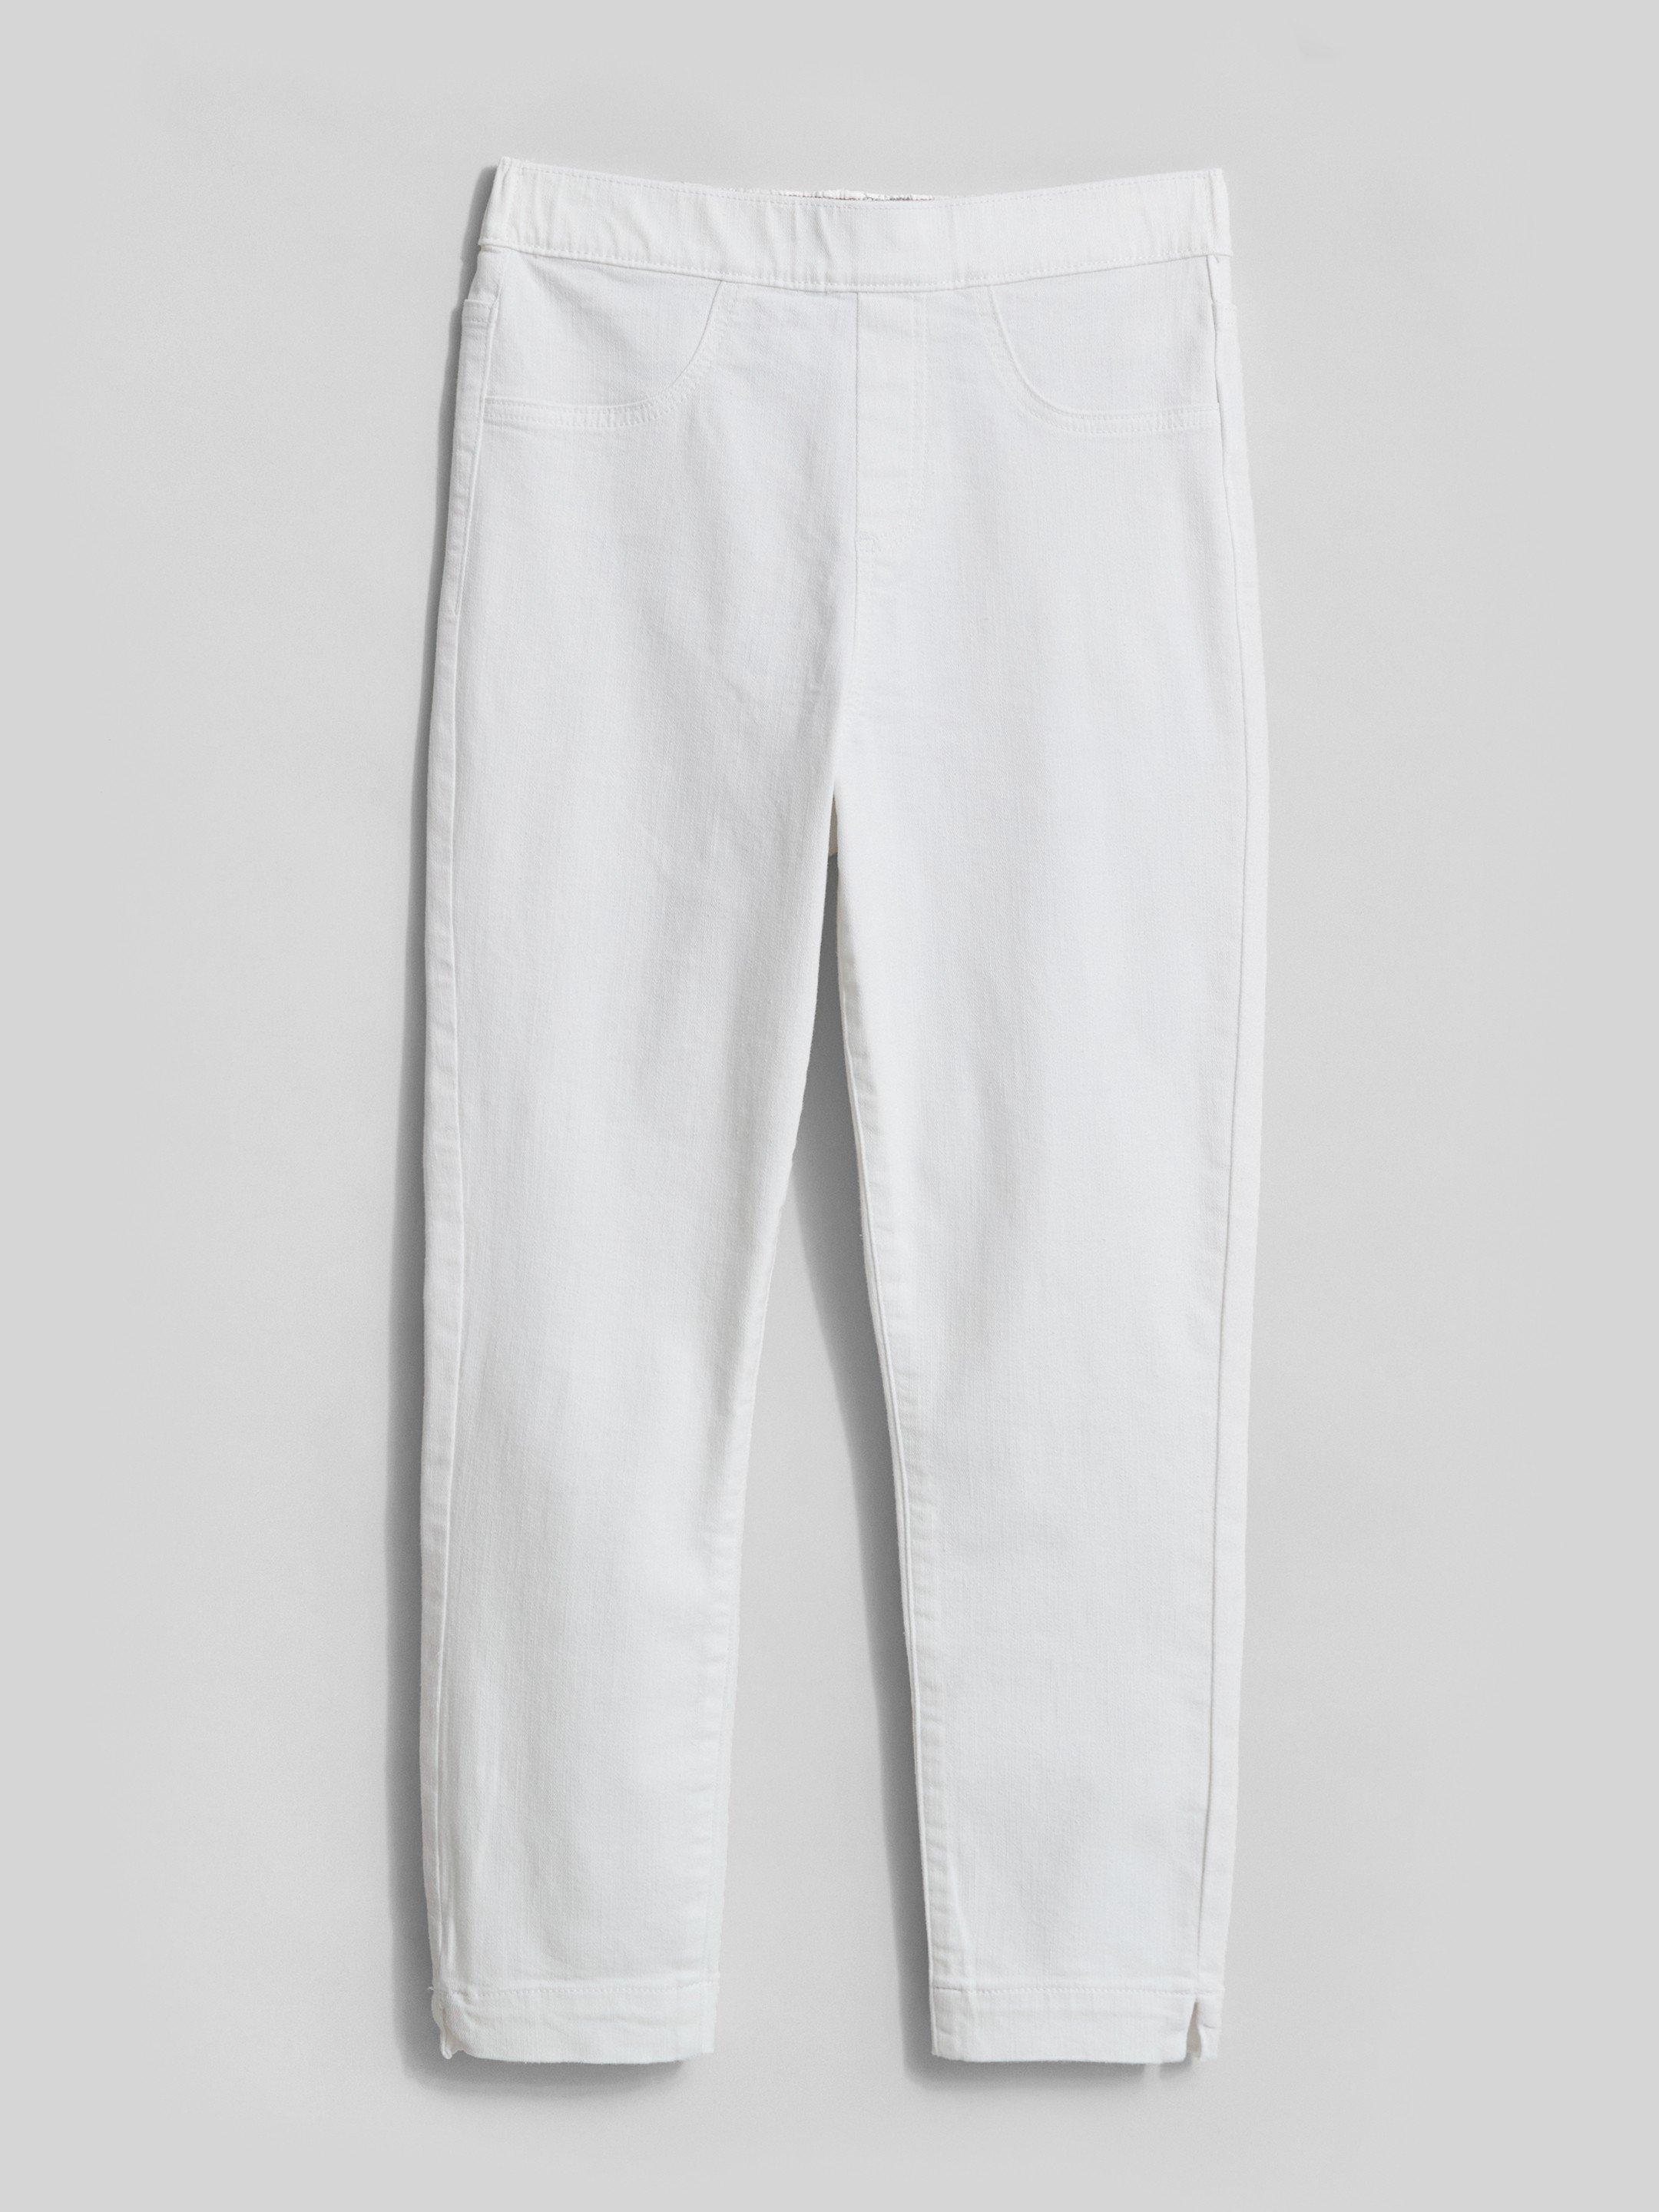 Janey Crop Jeggings in NAT WHITE - FLAT FRONT